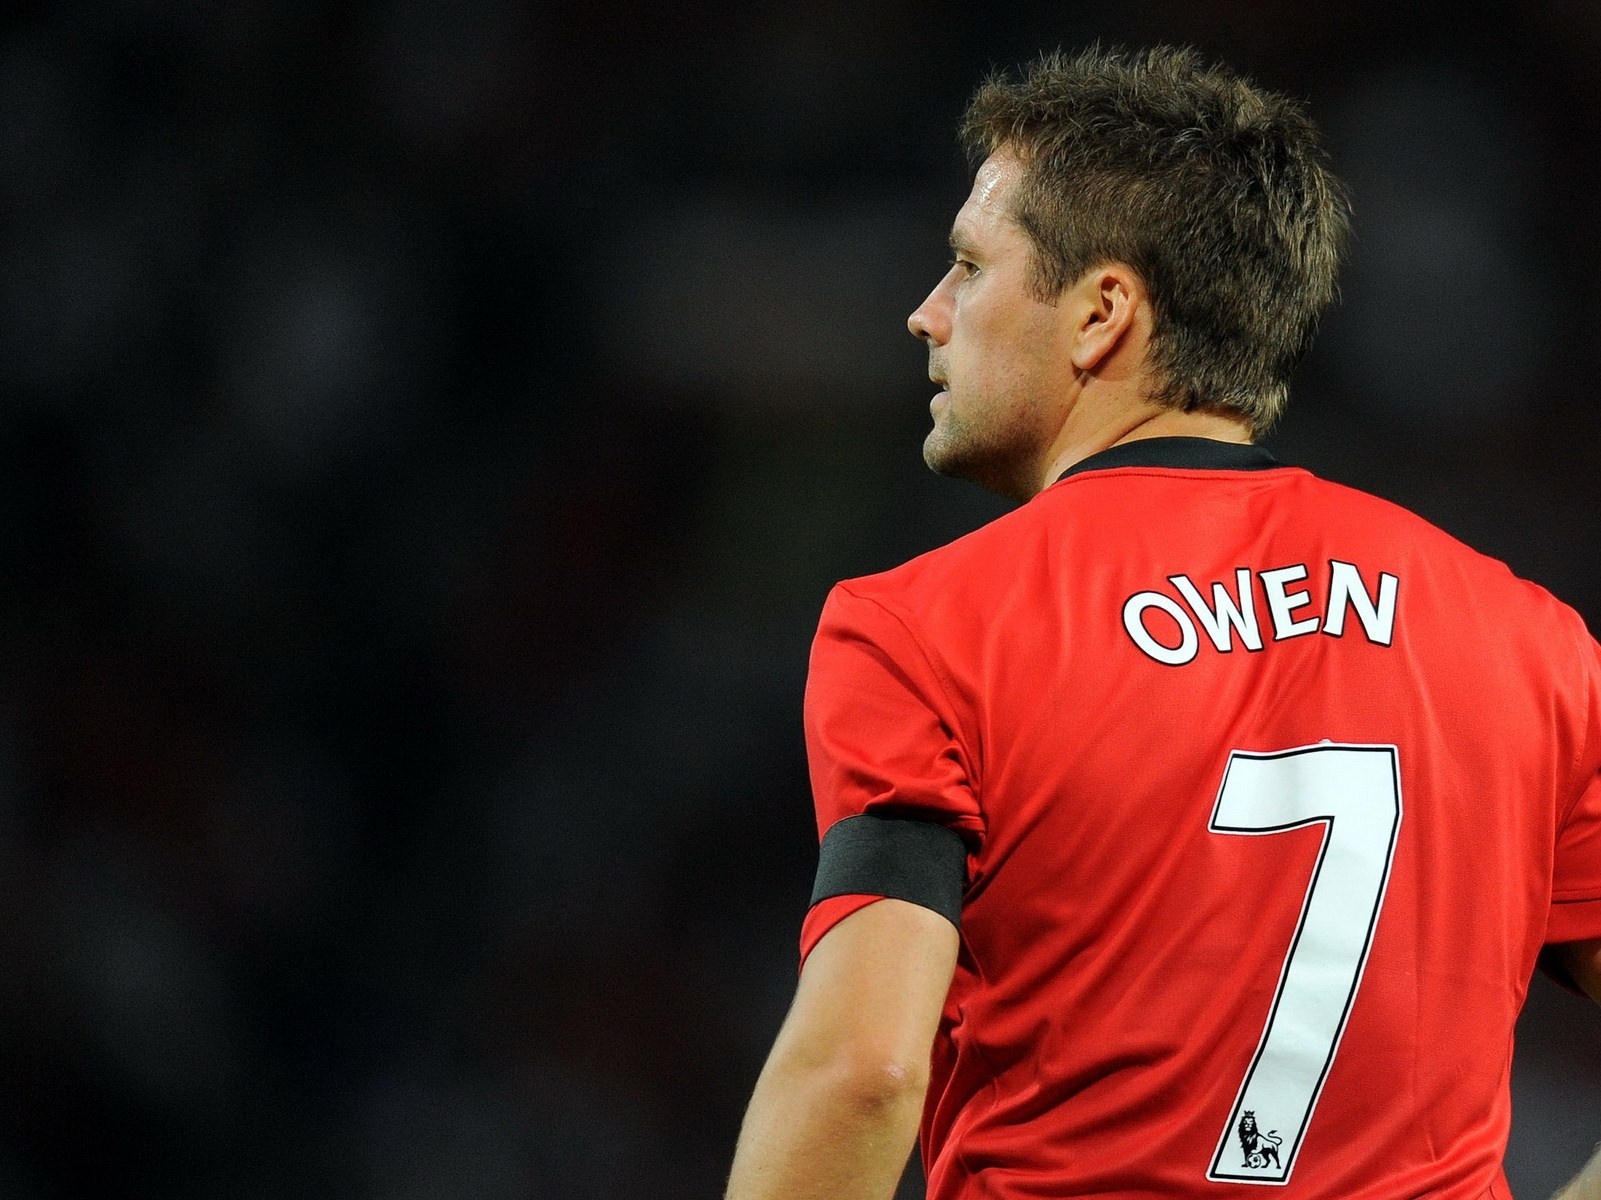 Michael Owen believes Manchester United are in the title race after the win over Leeds United.